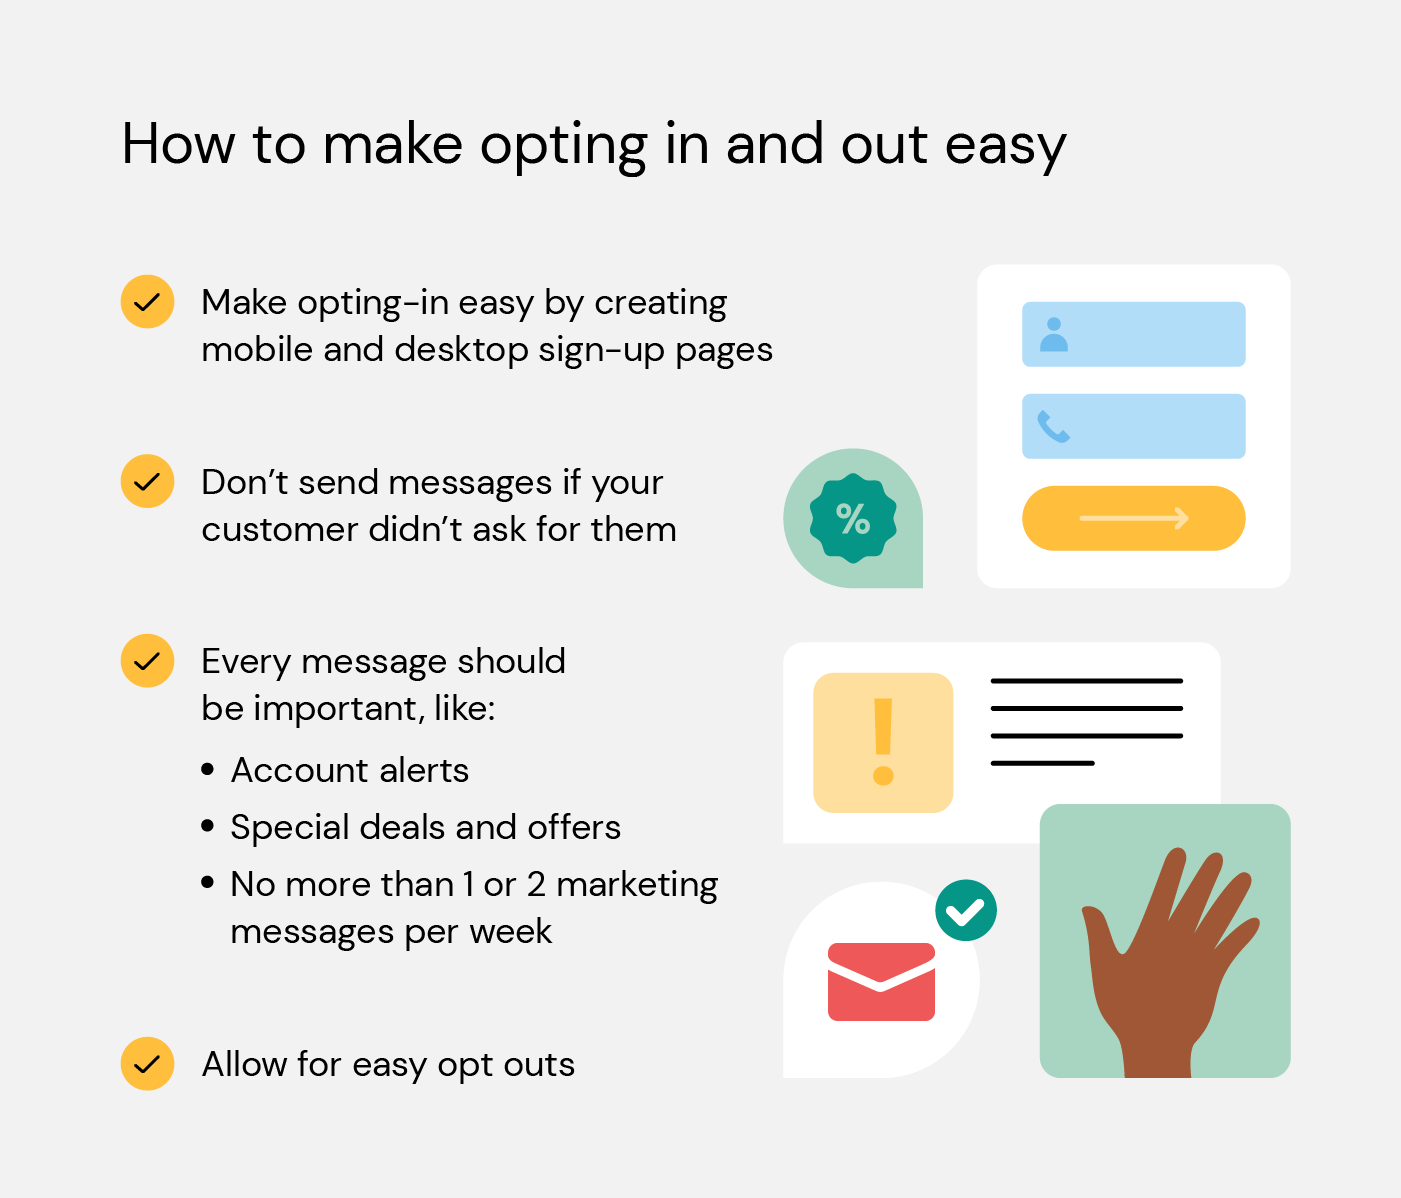 Illustration shows how to make opting in and out easy for customers